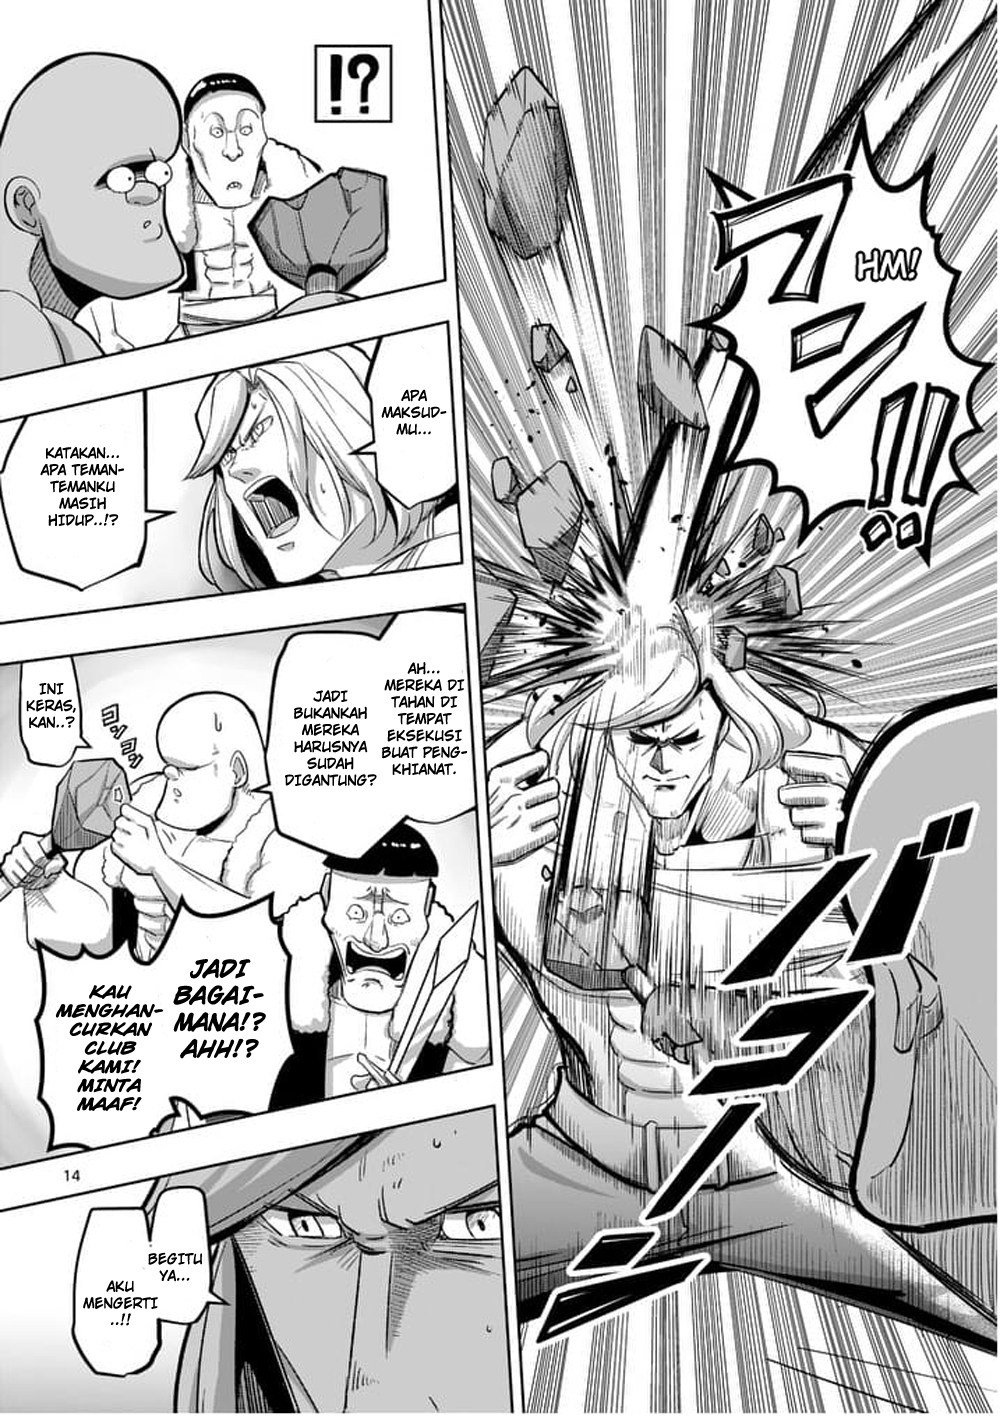 Helck Chapter 50